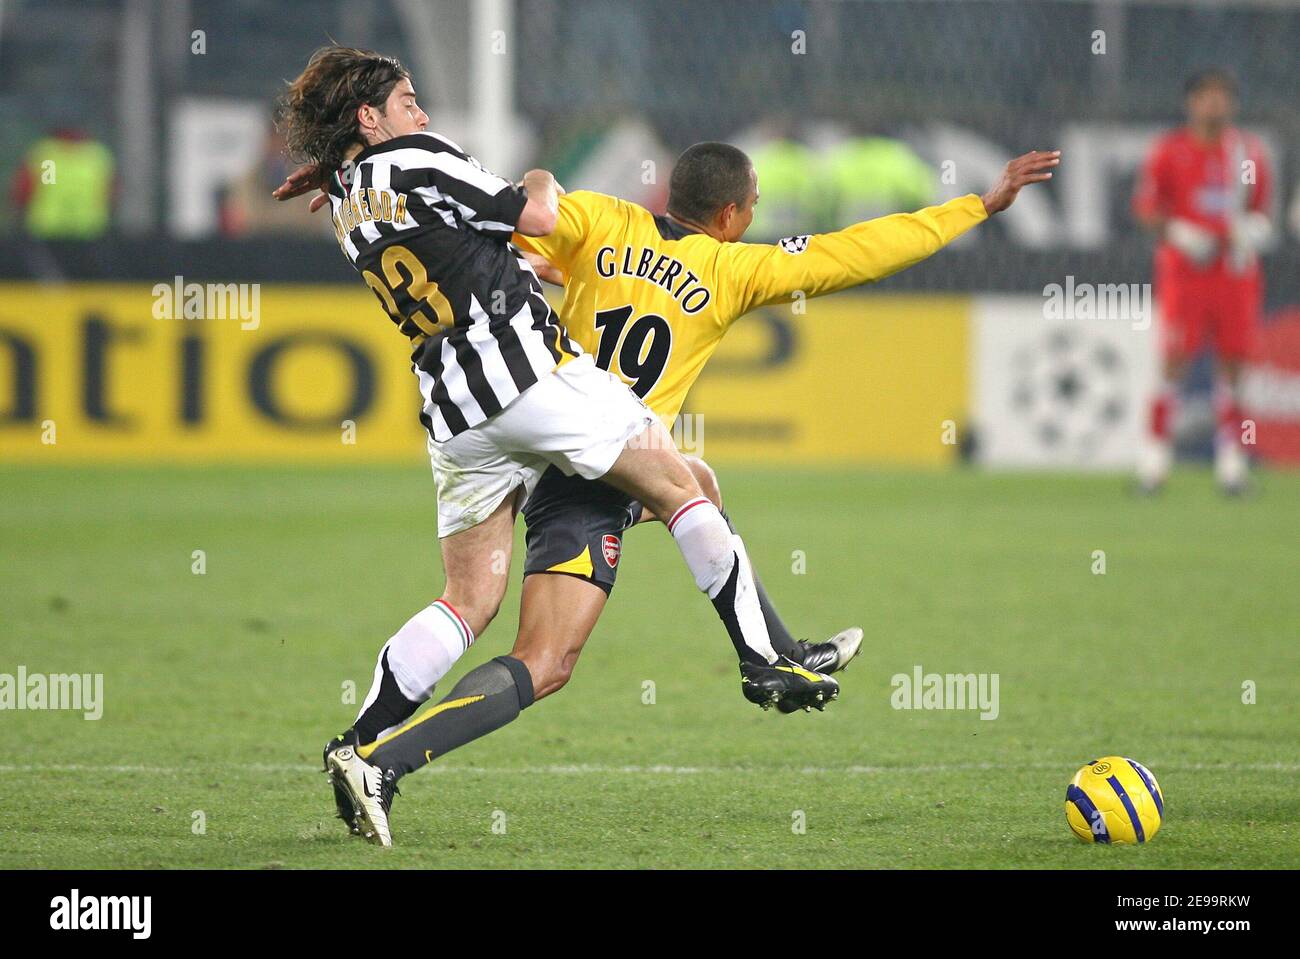 Juventus' Giuliano Giannichedda and Arsenal's Gilberto Silva during the UEFA Champions League, Quarter Final, Second Leg, Juventus vs Arsenal in Turin, Italy on April 5, 2006. The game ended in a draw 0-0. Photo by Christian Liewig/ABACAPRESS.COM Stock Photo